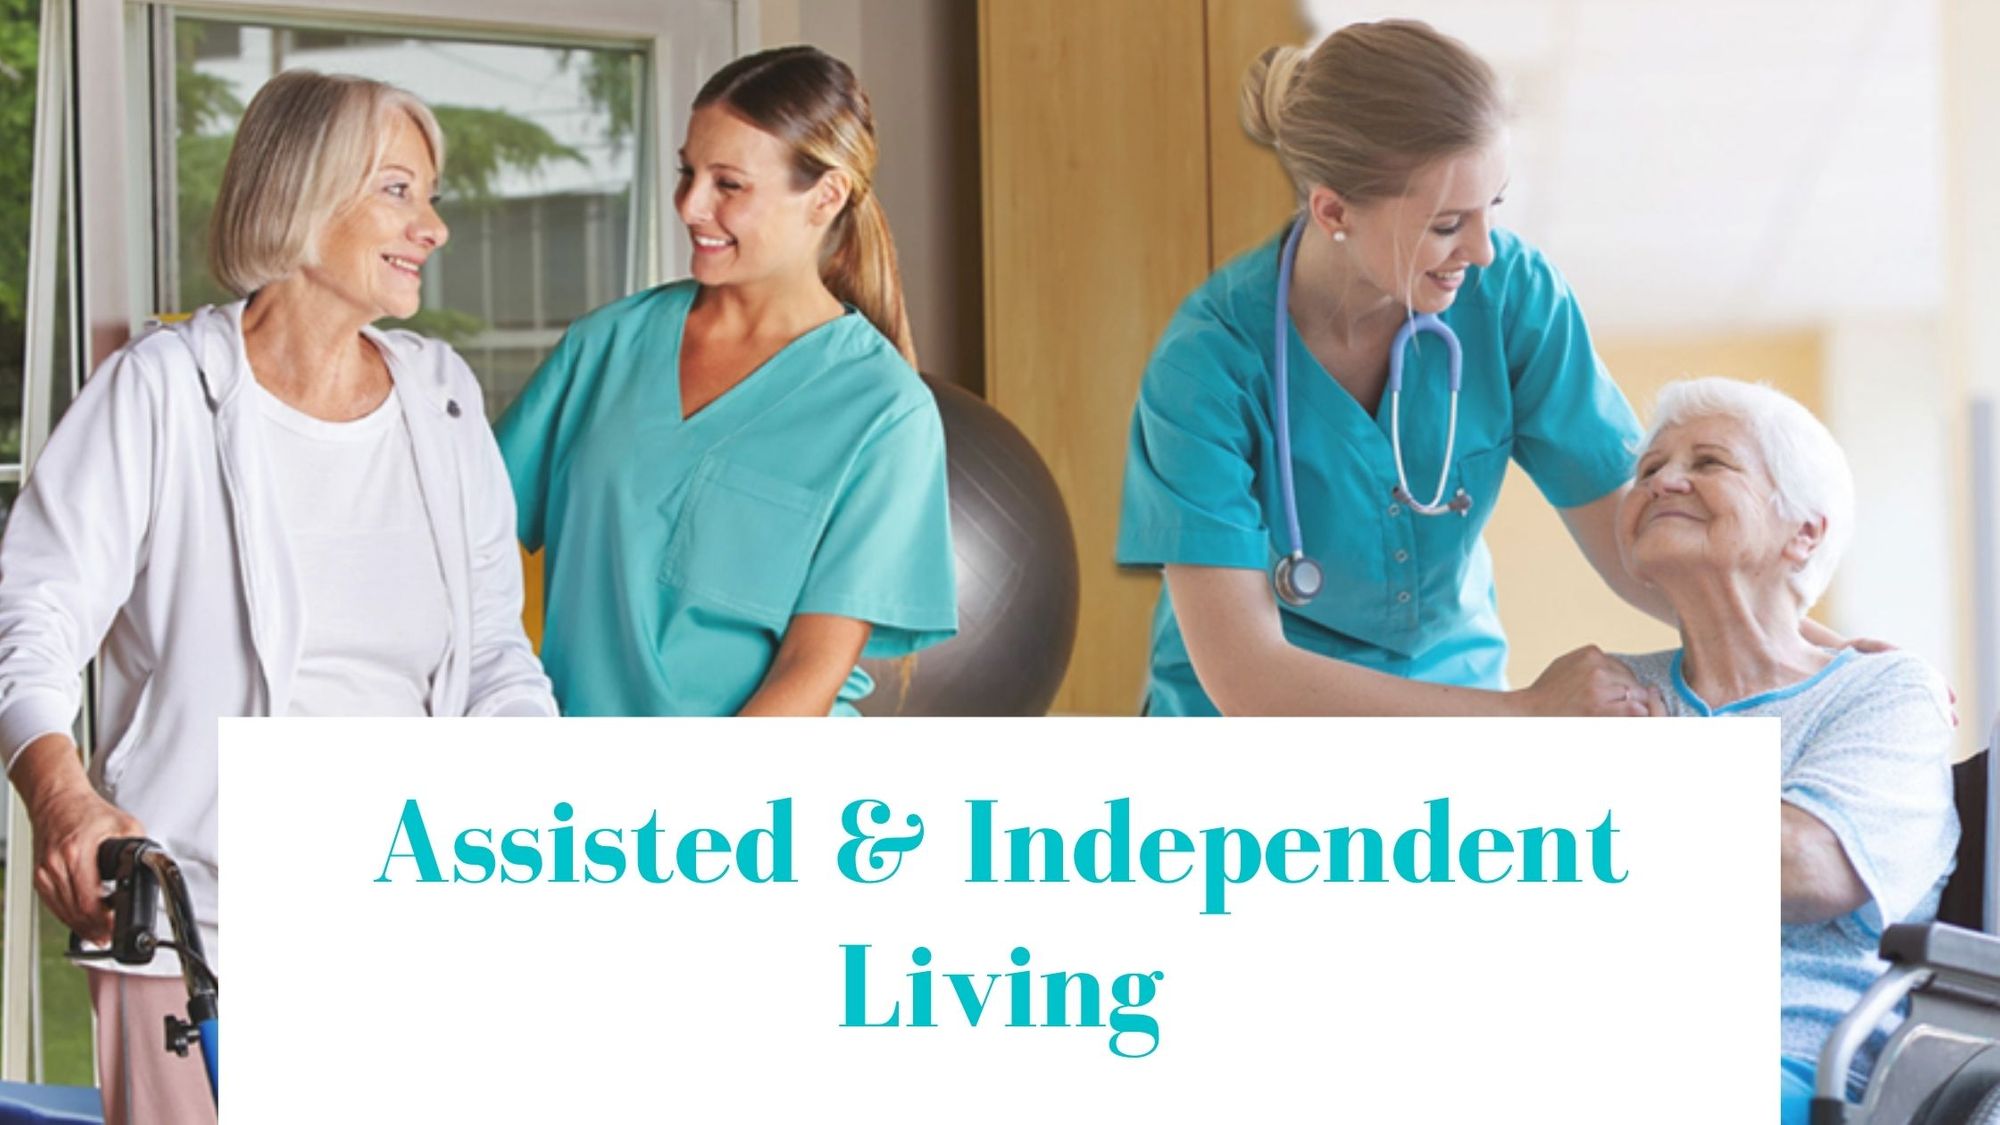 Assisted & Independent Living-Discover Senior Care Options